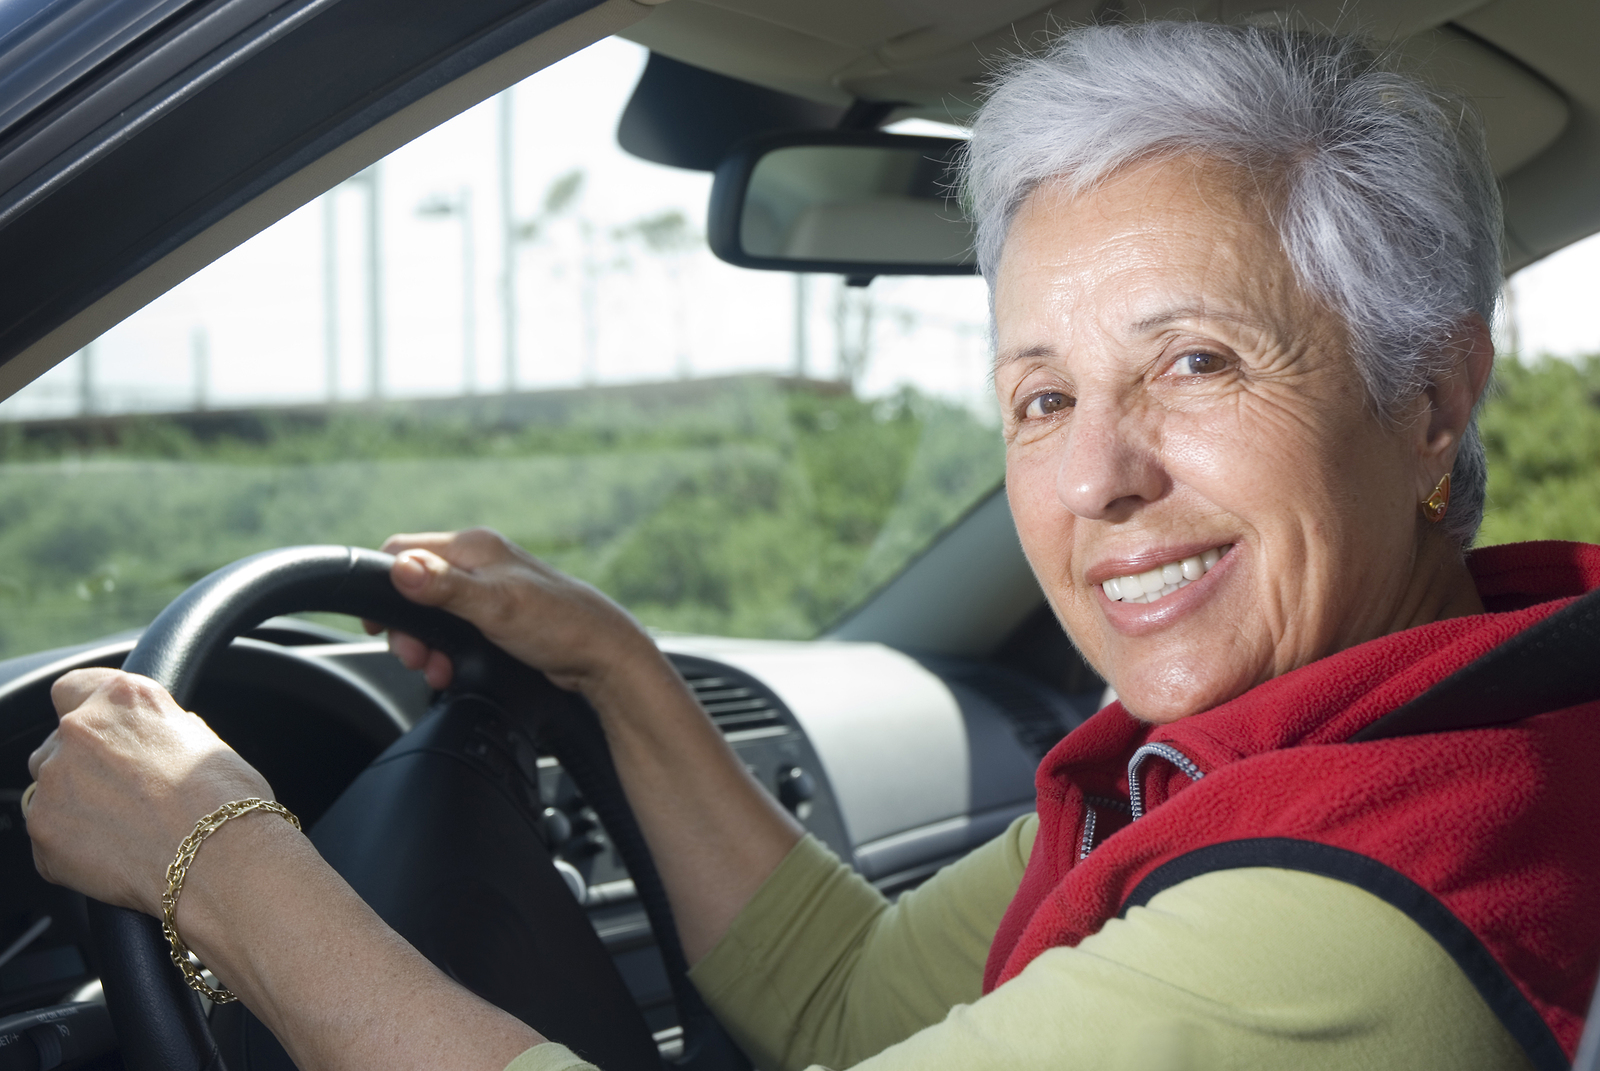 Mature driving classes in glenn county